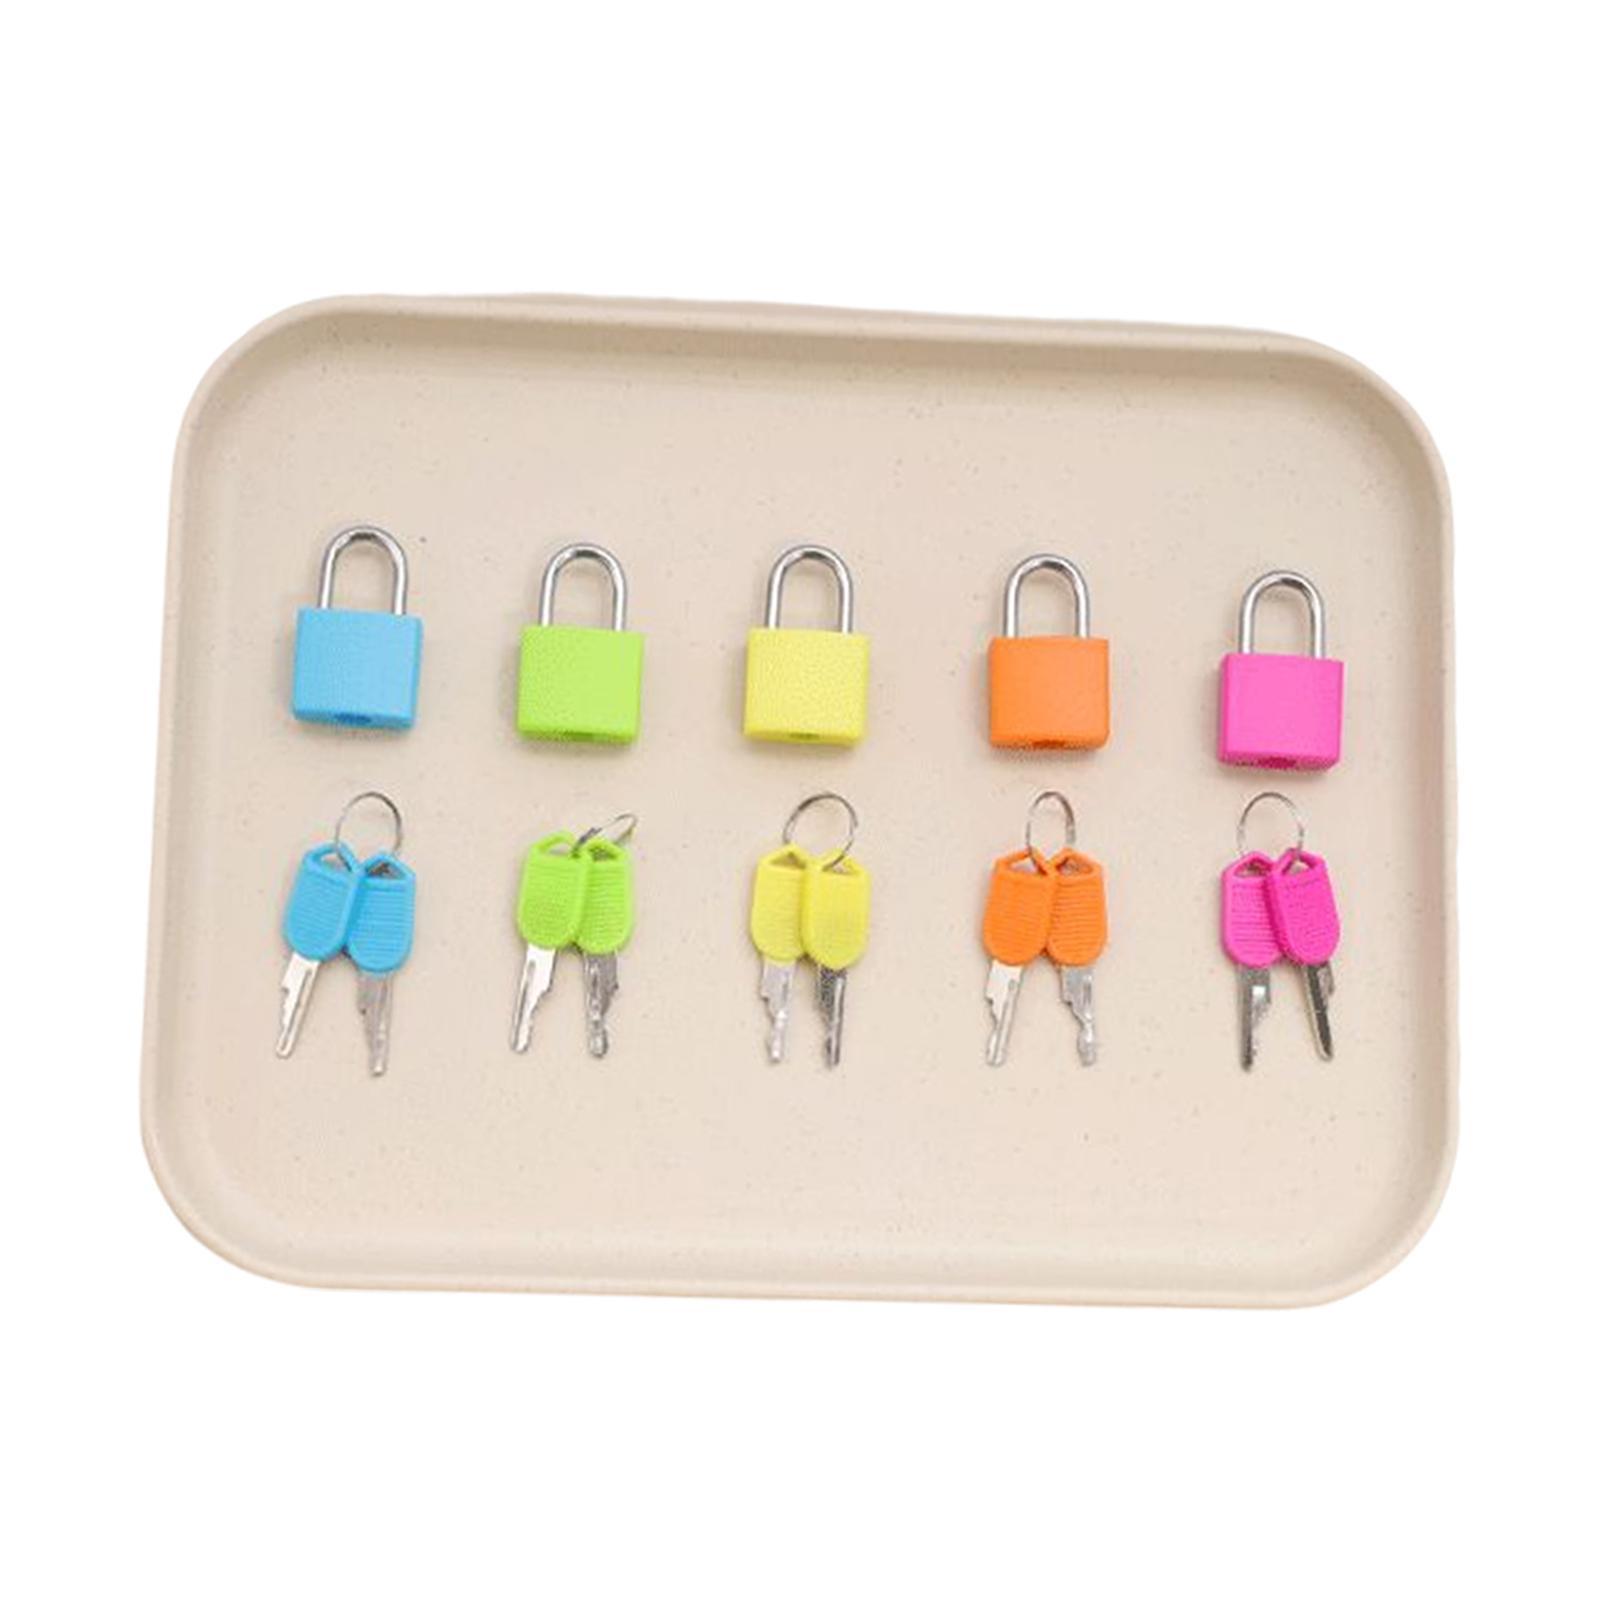 5 Pieces Montessori Material Color Matching Lock Set for Children Toddlers